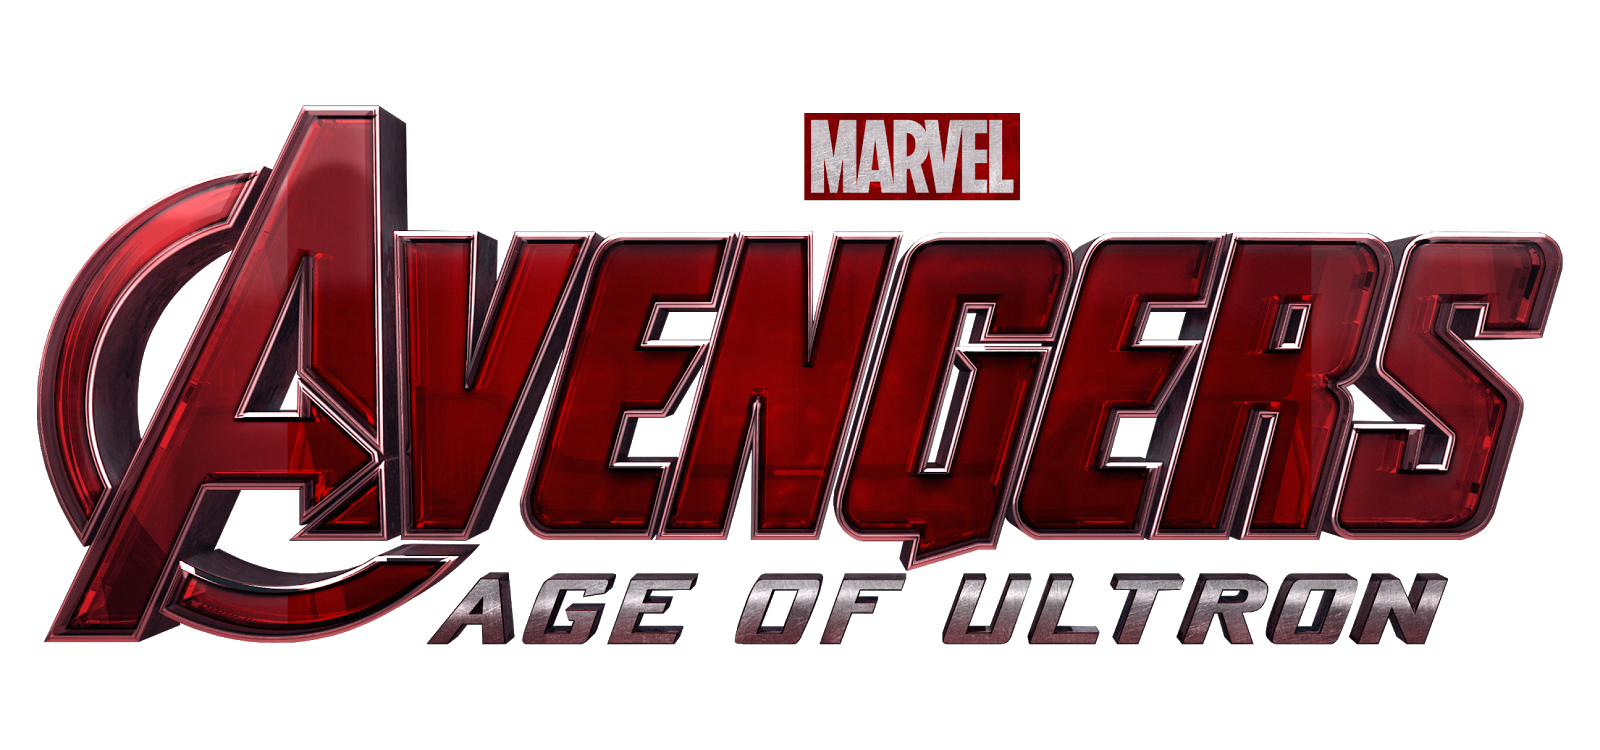 Avengers_Age_of_Ultron_logo.png